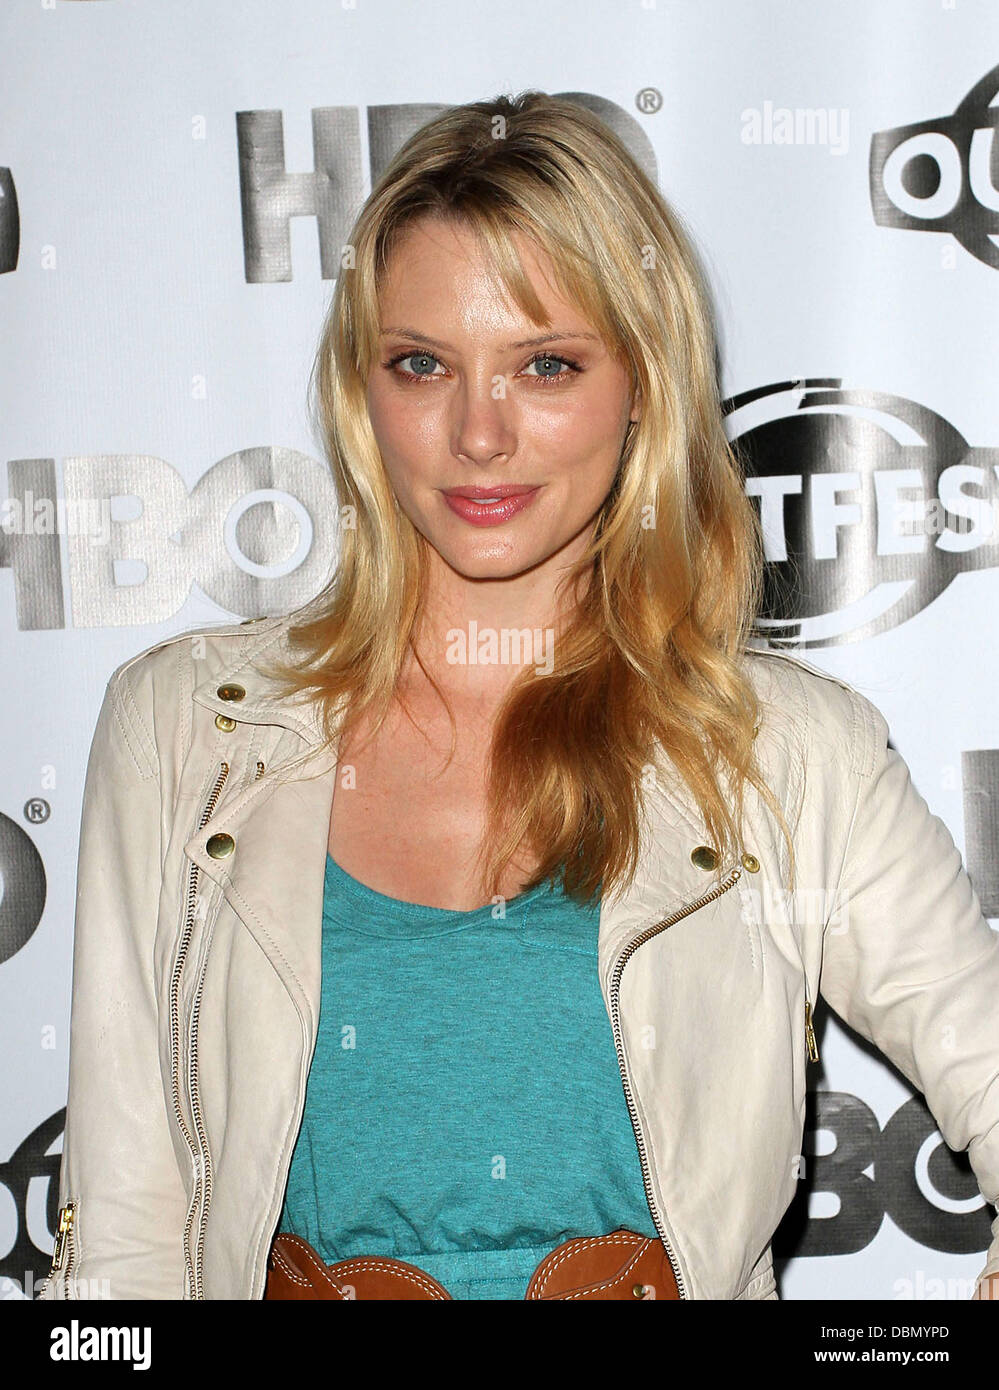 April Bowlby 2011 Outfest Film Festival Screening Of 'Drop Dead Diva' held at the Directors Guild of America Los Angeles, California - 17.07.11 Stock Photo